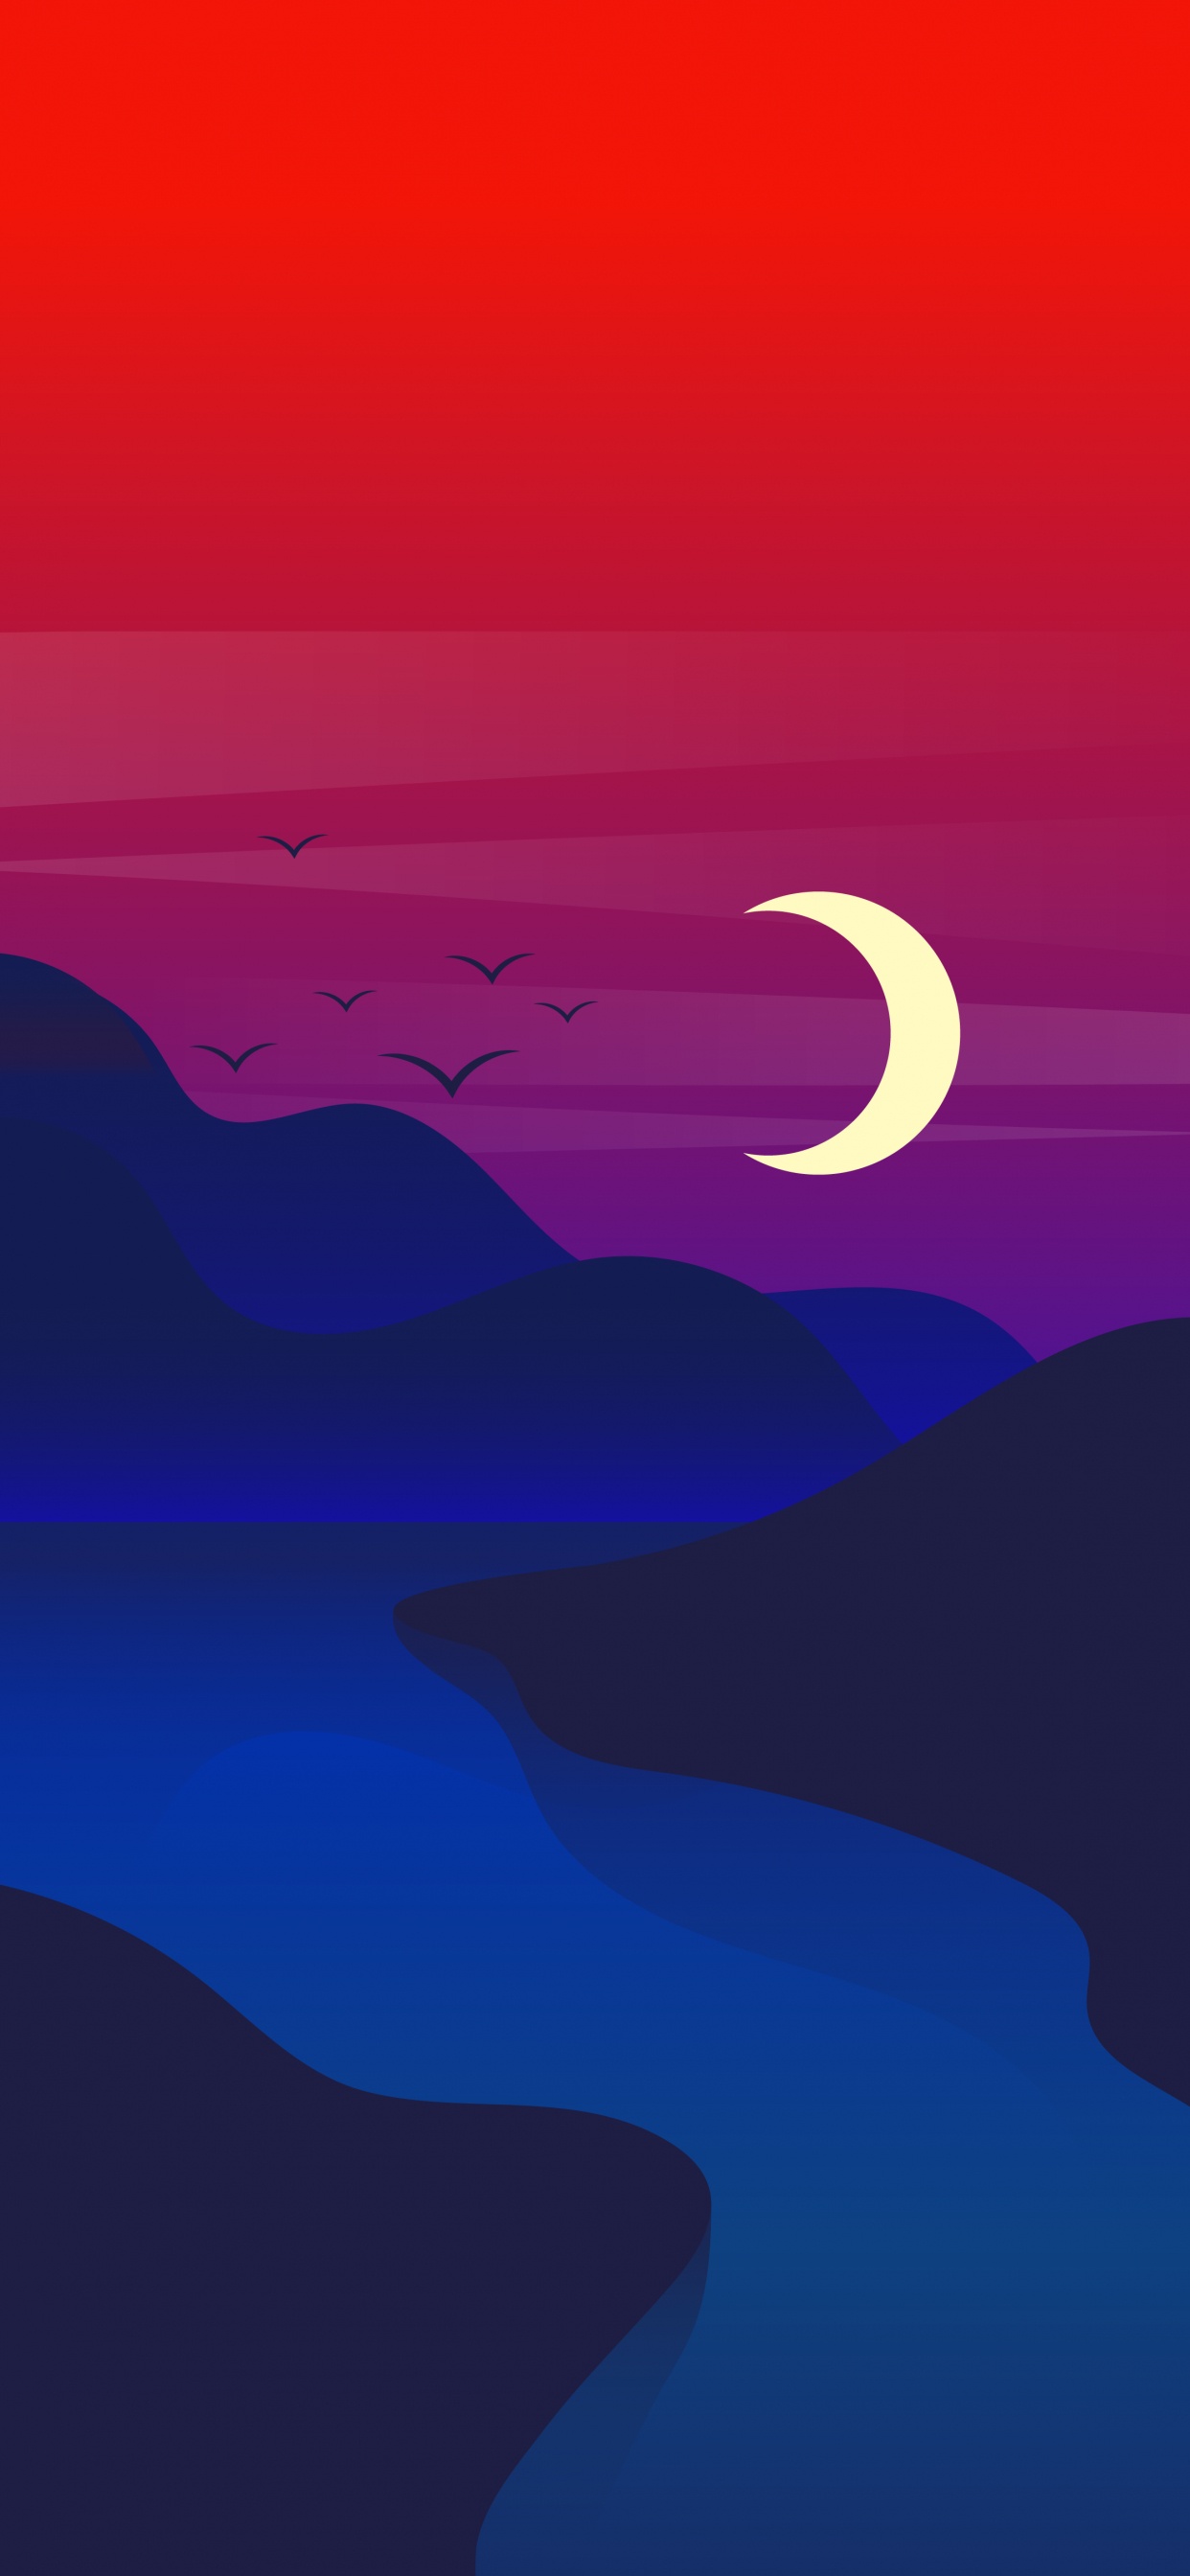 Tablet, Ambiente, Luna, Afterglow, Atardecer. Wallpaper in 1242x2688 Resolution